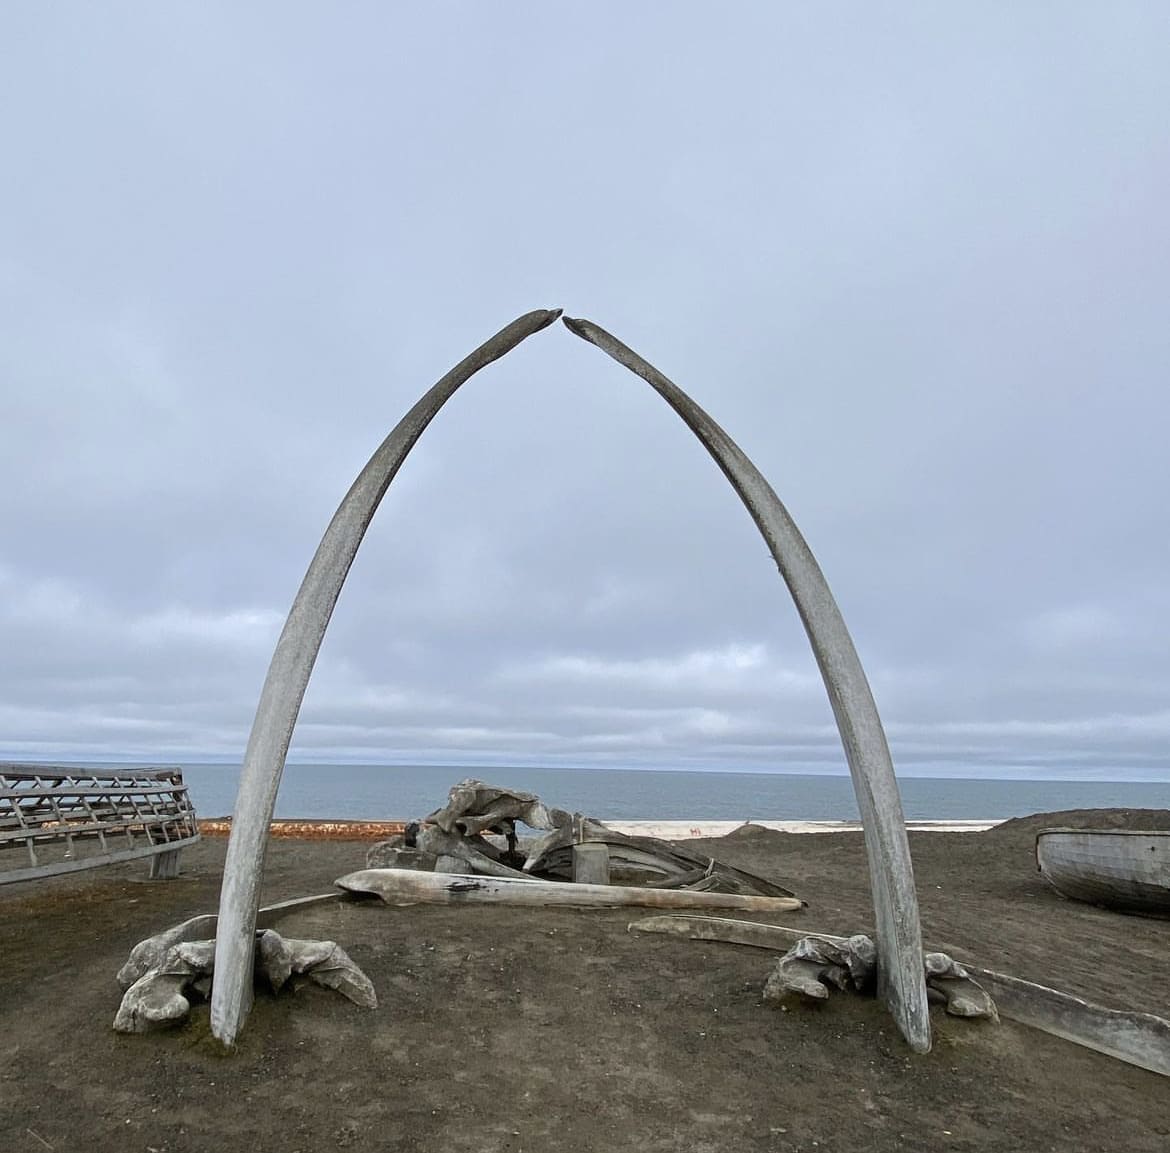 Barrow, Alaska, USA - Beyond The Ice: Unearthing The World's Coldest Cities